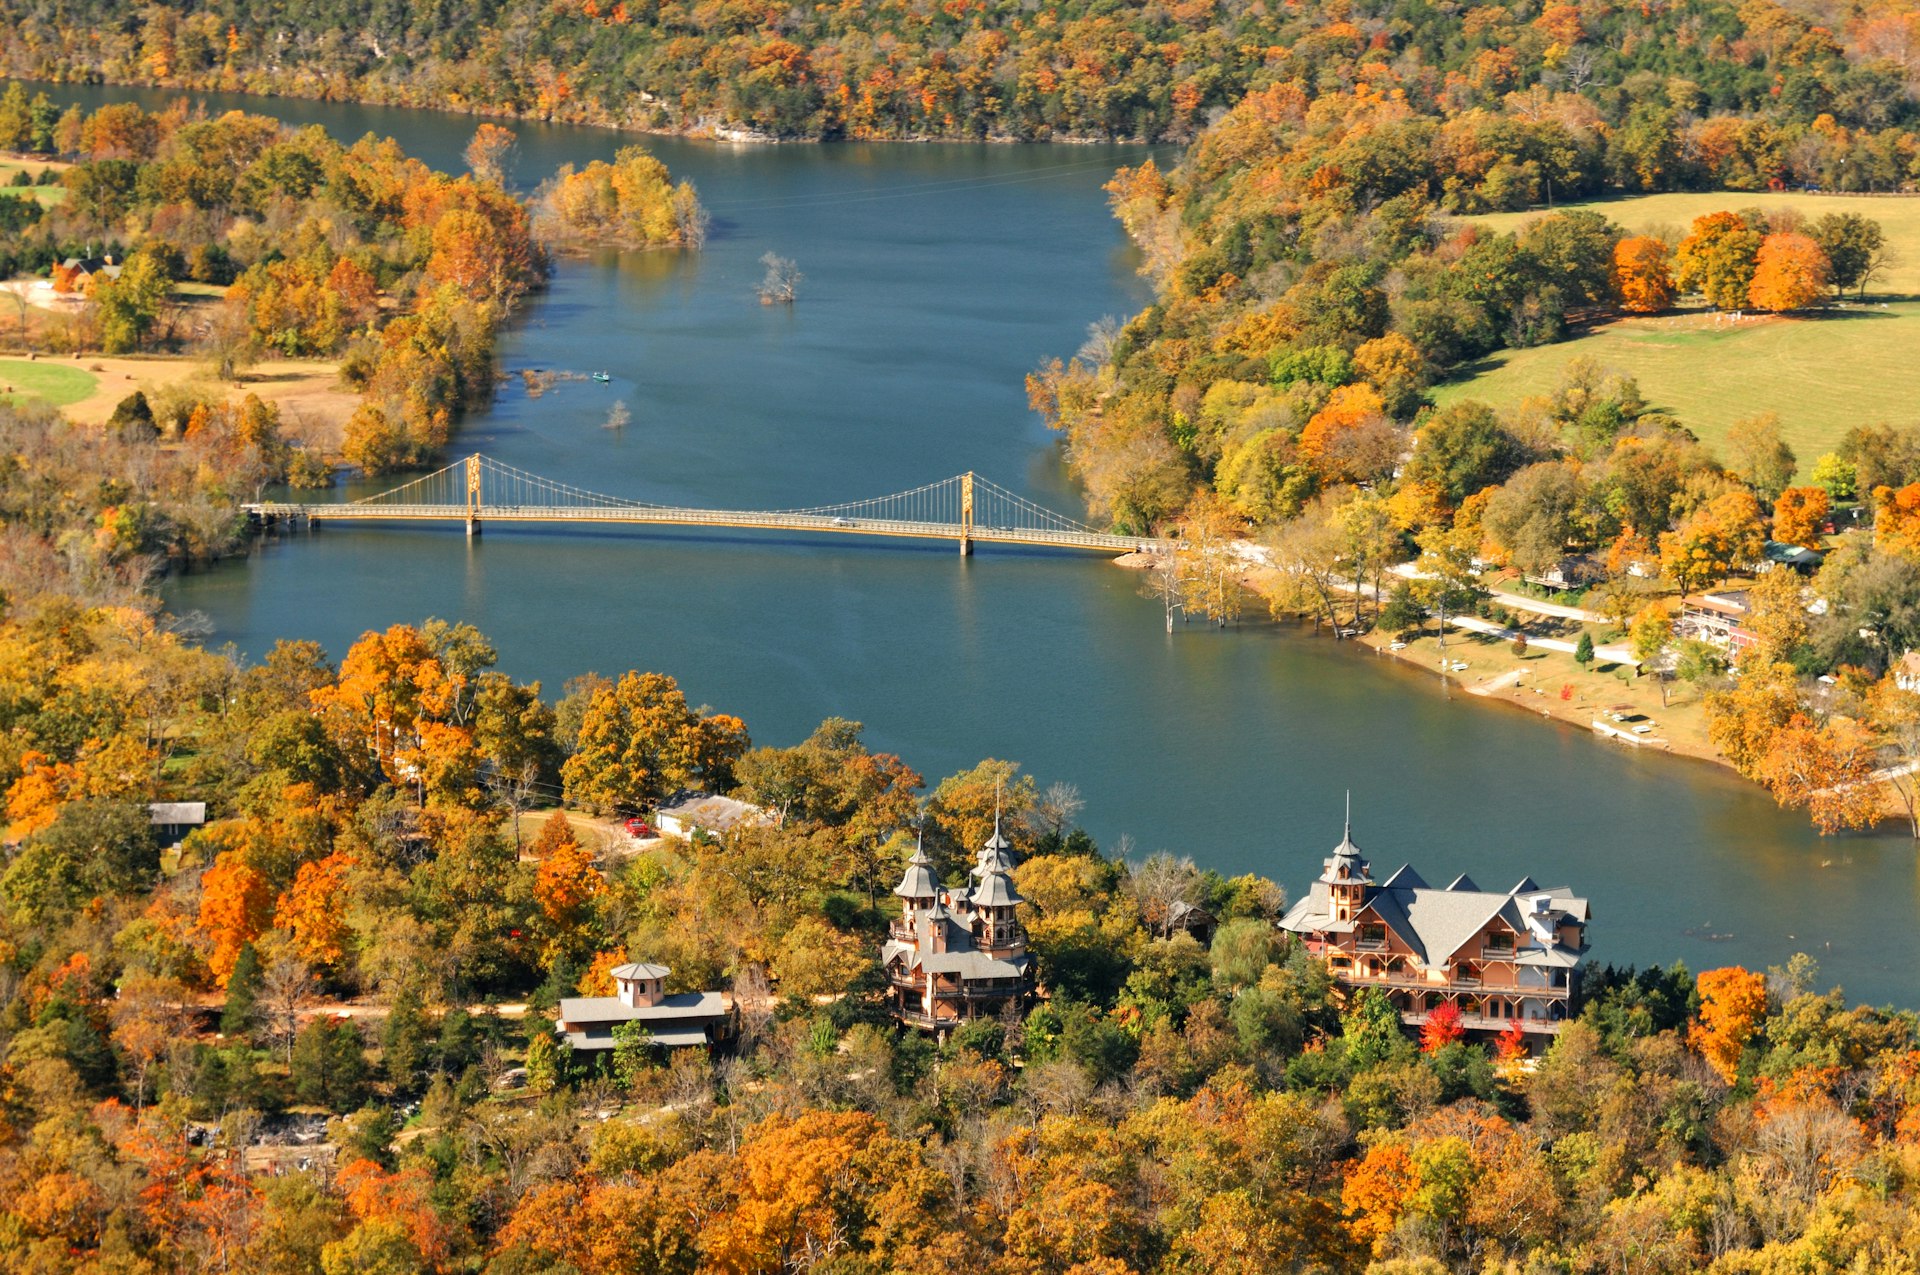 An aerial view of Eureka Springs, Arkansas, in autumn with colorful foliage